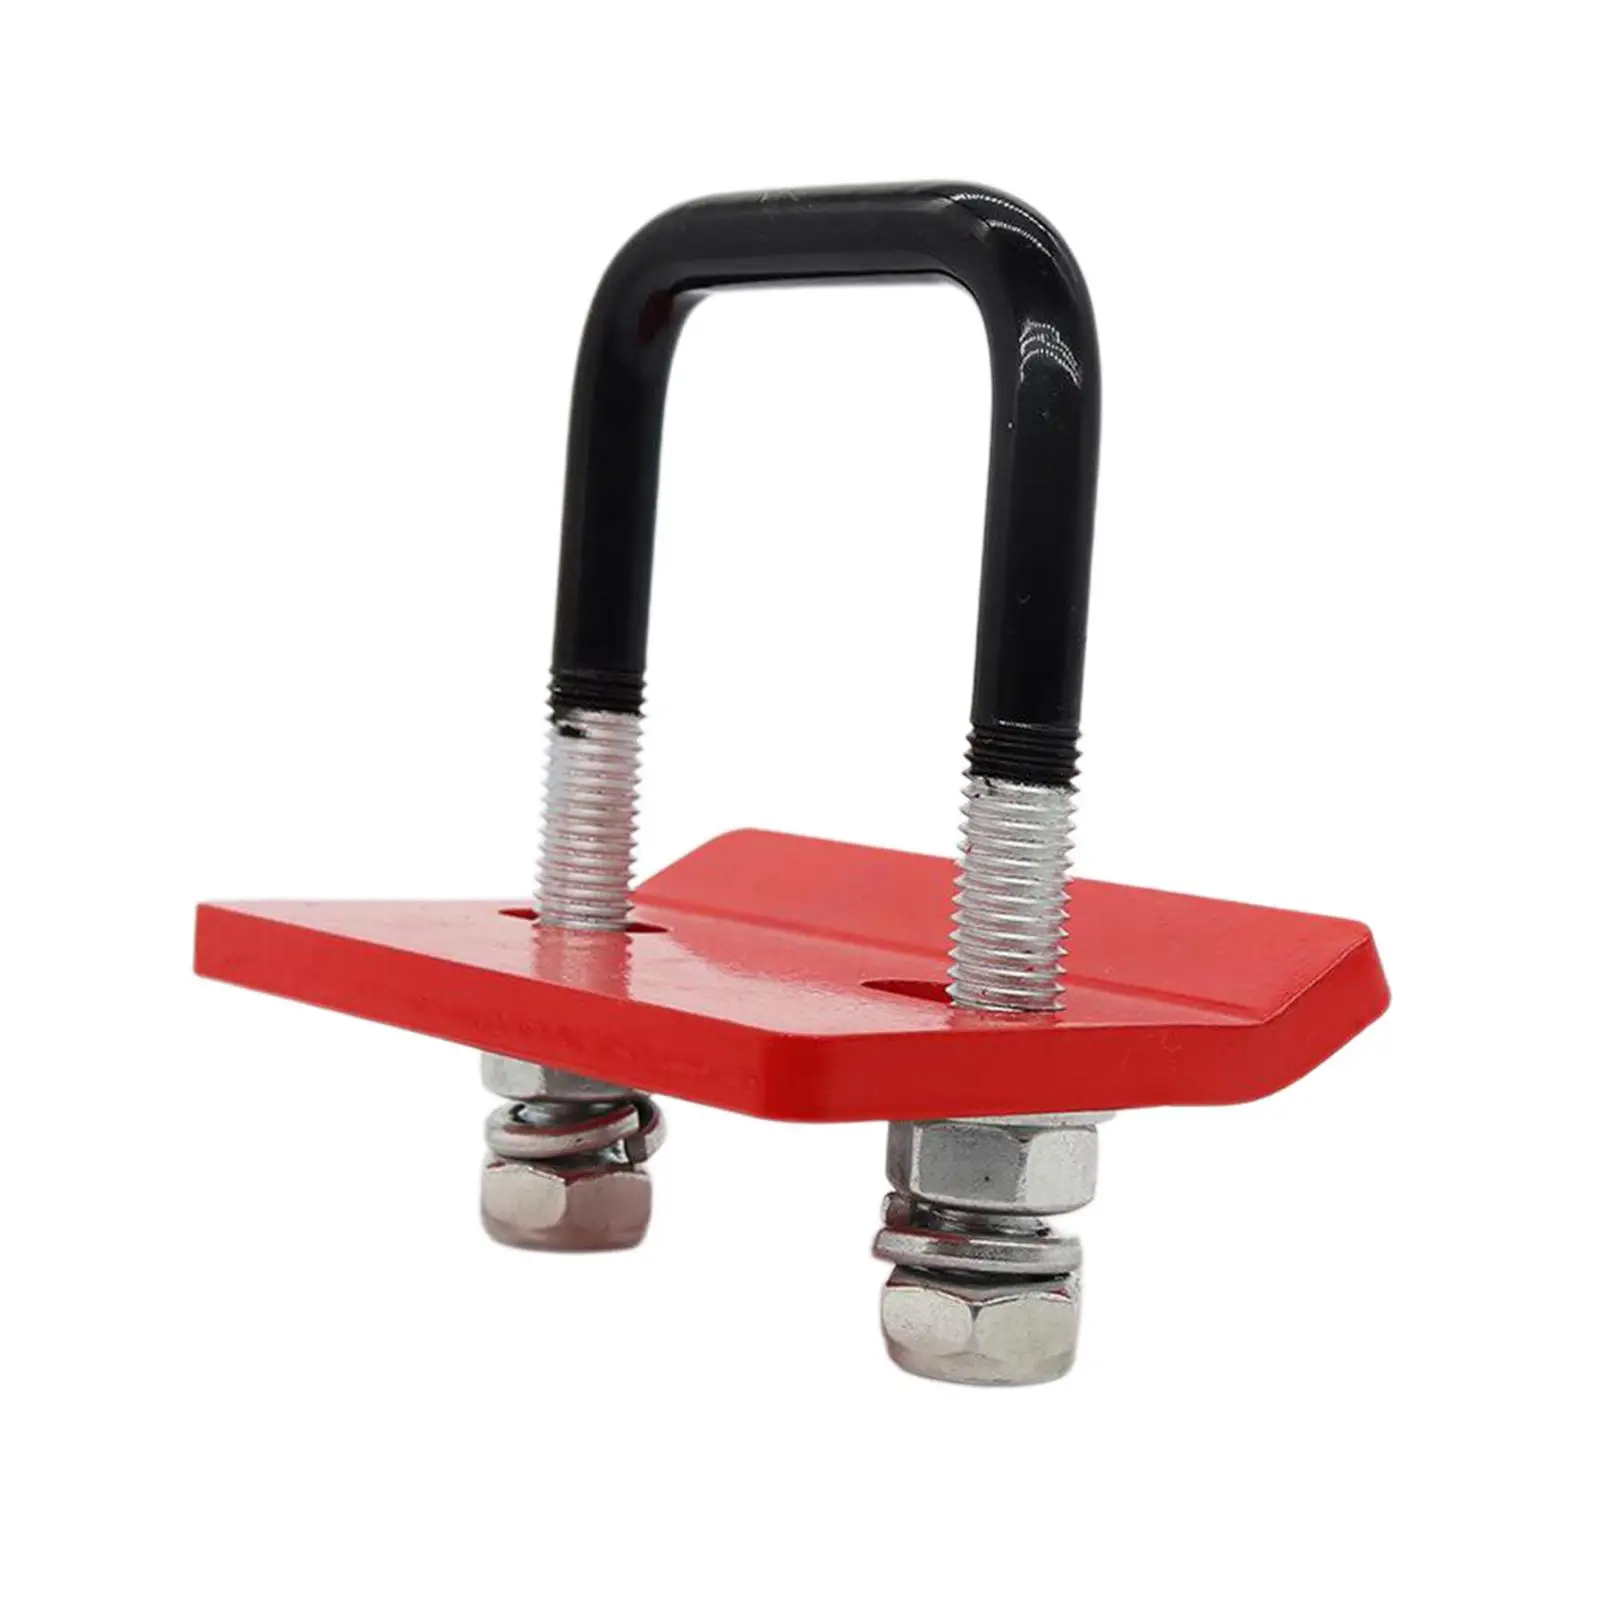 Hitch Tightener Lock Down Tow Clamp for Boat Trailer Ball Mount Hitch Tray